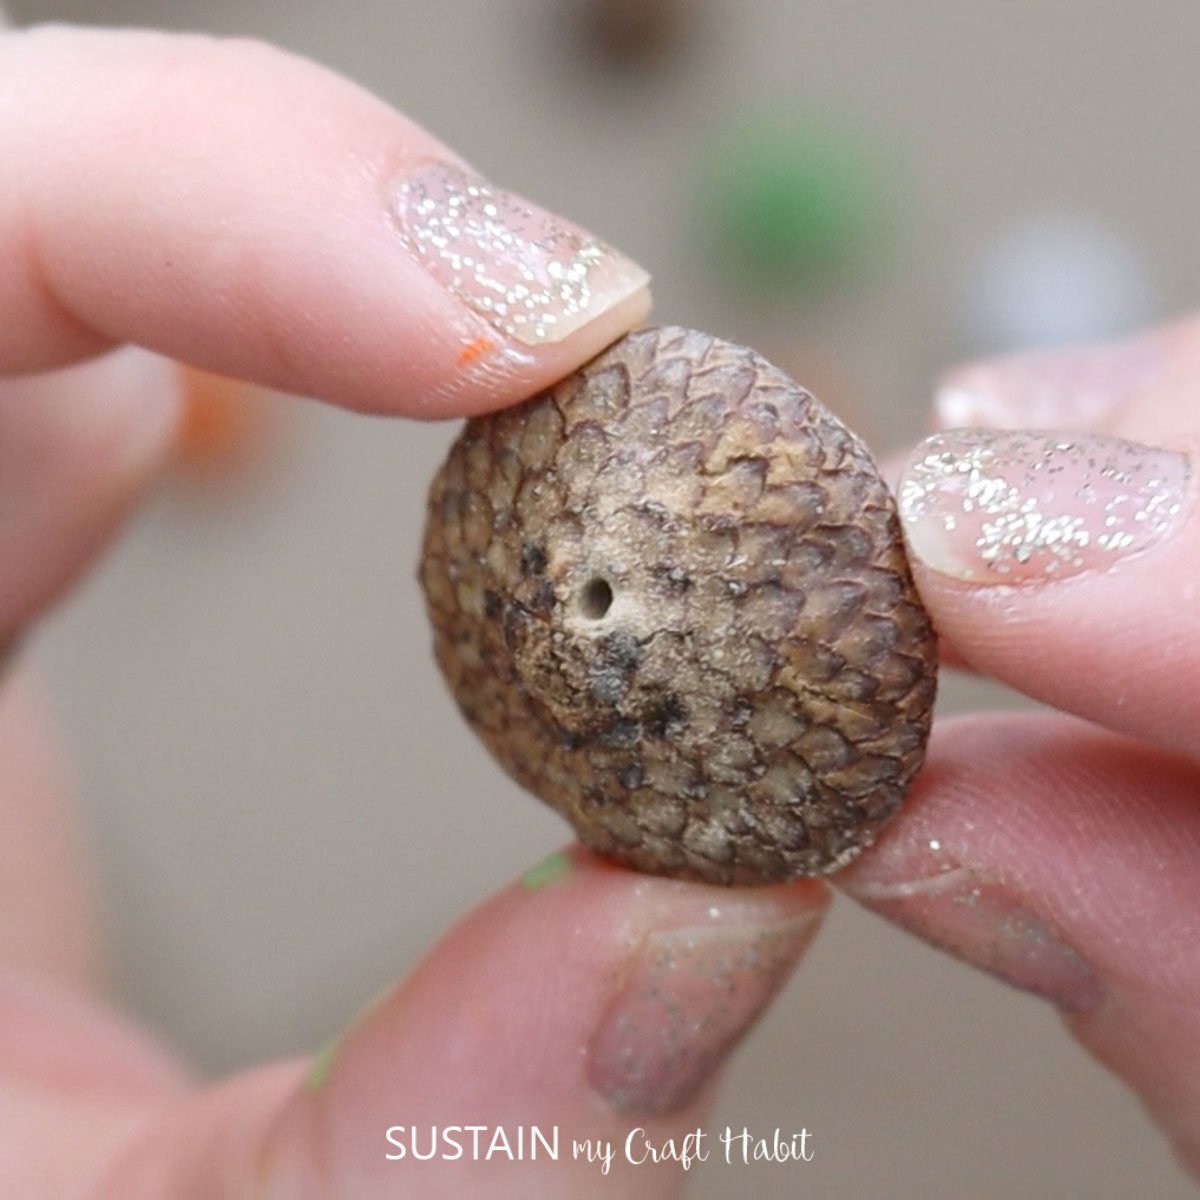 Drilled hole on the top of the acorn.